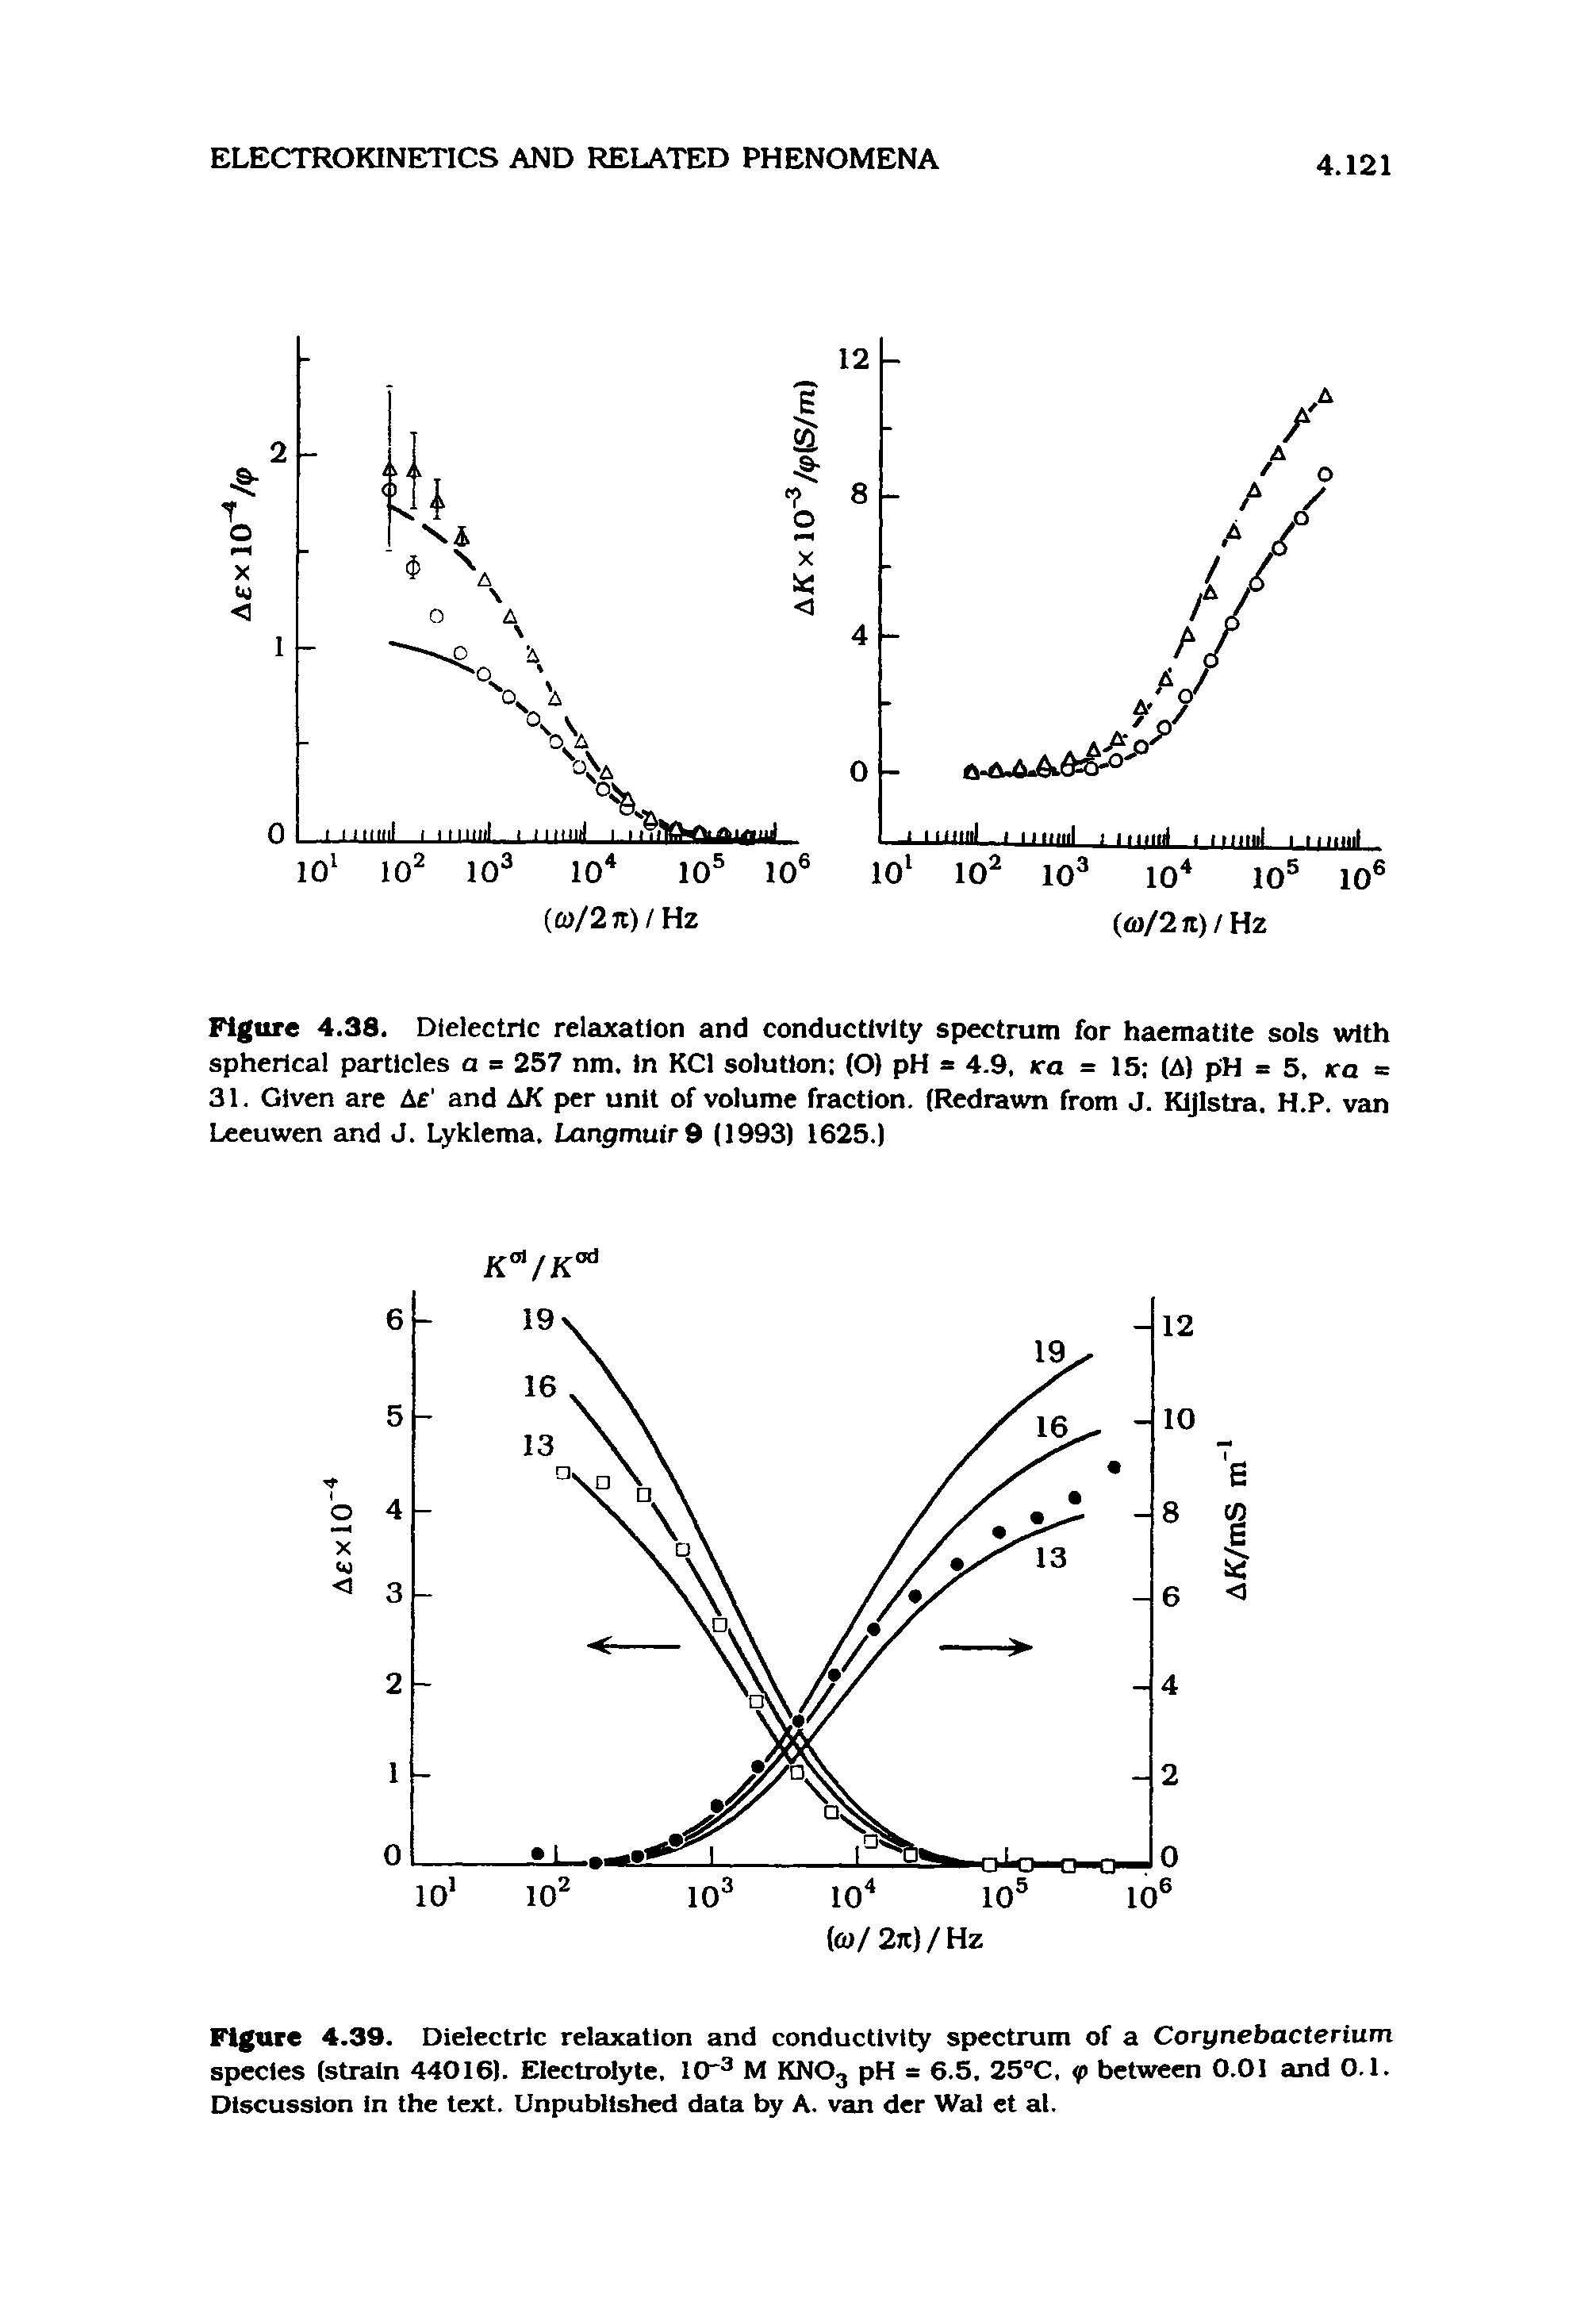 Figure 4.38. Dielectric relaxation and conductivity spectrum for haematite sols with spherical particles a = 257 nm. in KCl solution (O) pH = 4.9, <ra = 15 (A) pH = 5. ra = 31. Given are As and AK per unit of volume fraction. (Redrawn from J. Kijlstra. H.P. van Leeuwen and J. Lyklema. Langmuir 9 (1993) 1625.)...